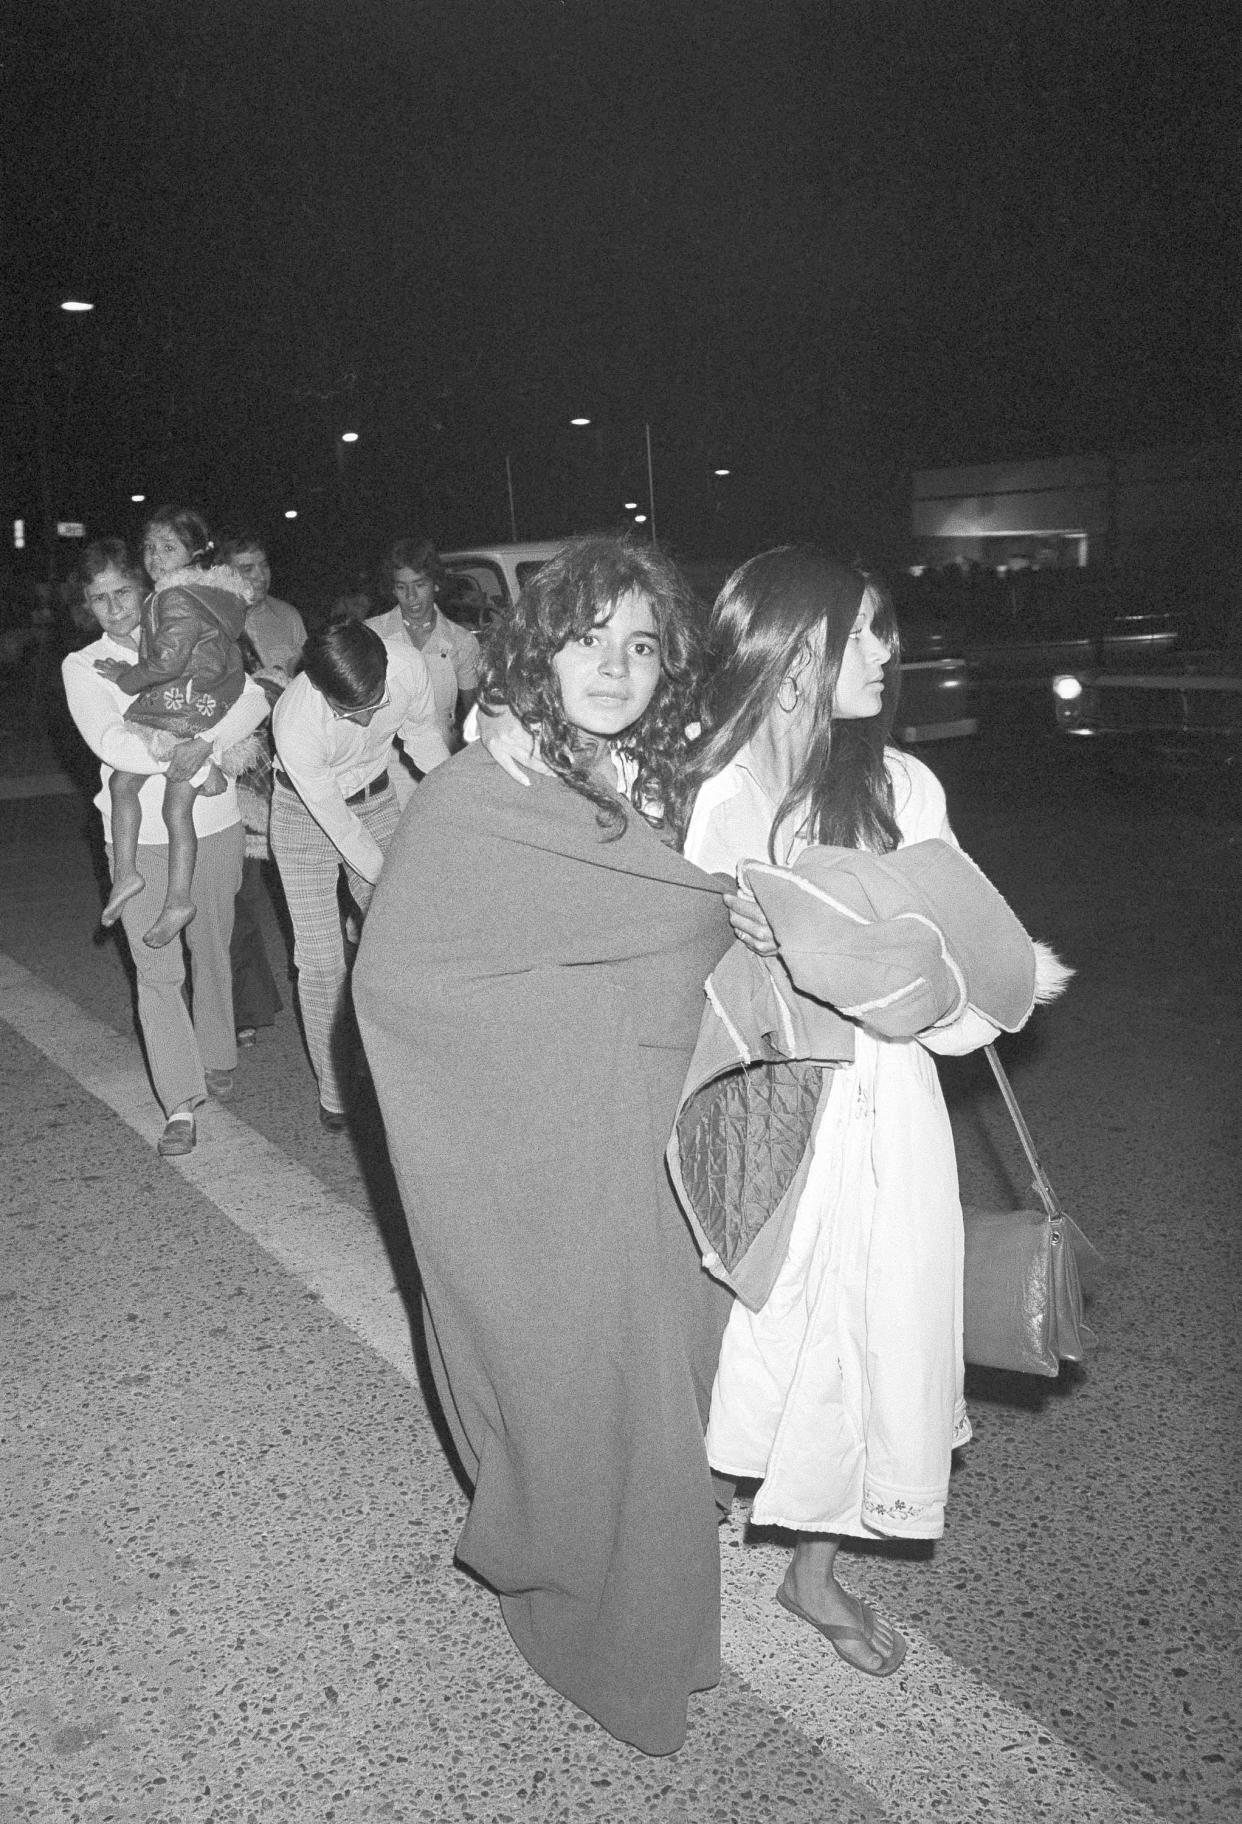 FILE - Two Dairyland Union School District students, who were among the 26 school children, and their bus driver who were abducted and buried in a truck underground, walk to the family car clad in blankets after release and early morning arrival in Chowchilla, Calif., on July 17, 1976. California parole commissioners have recommended parole for the last of three men convicted of hijacking the school bus full of children for $5 million ransom in 1976. The two commissioners acted Friday, March 25, 2022, in the case of 70-year-old Frederick Woods. (AP Photo, File)